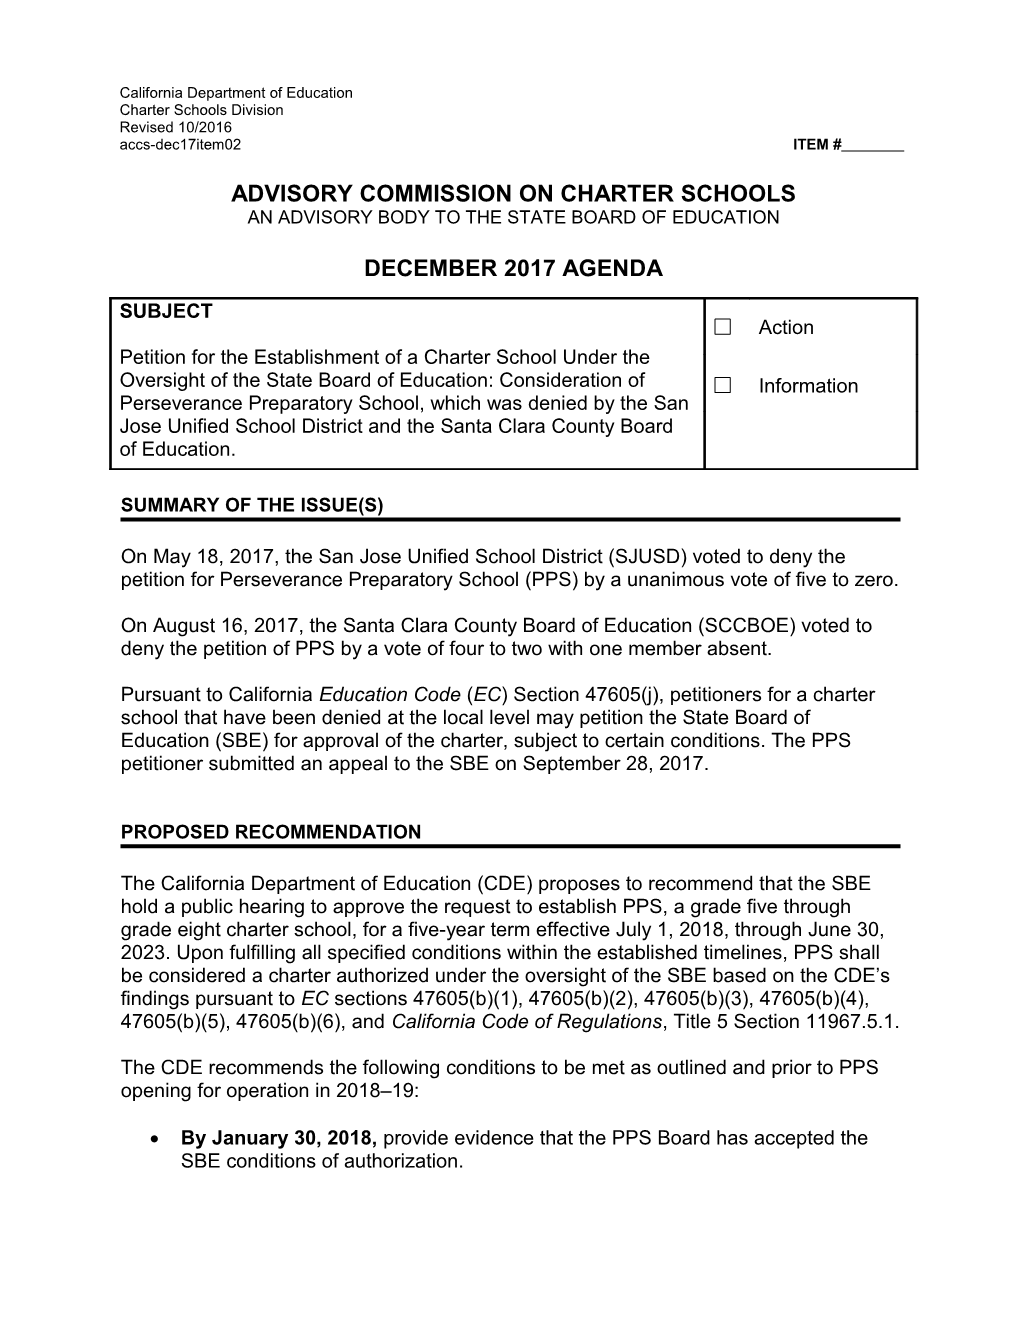 December 2017 ACCS Agenda Item 02 - Advisory Commission on Charter Schools (CA State Board